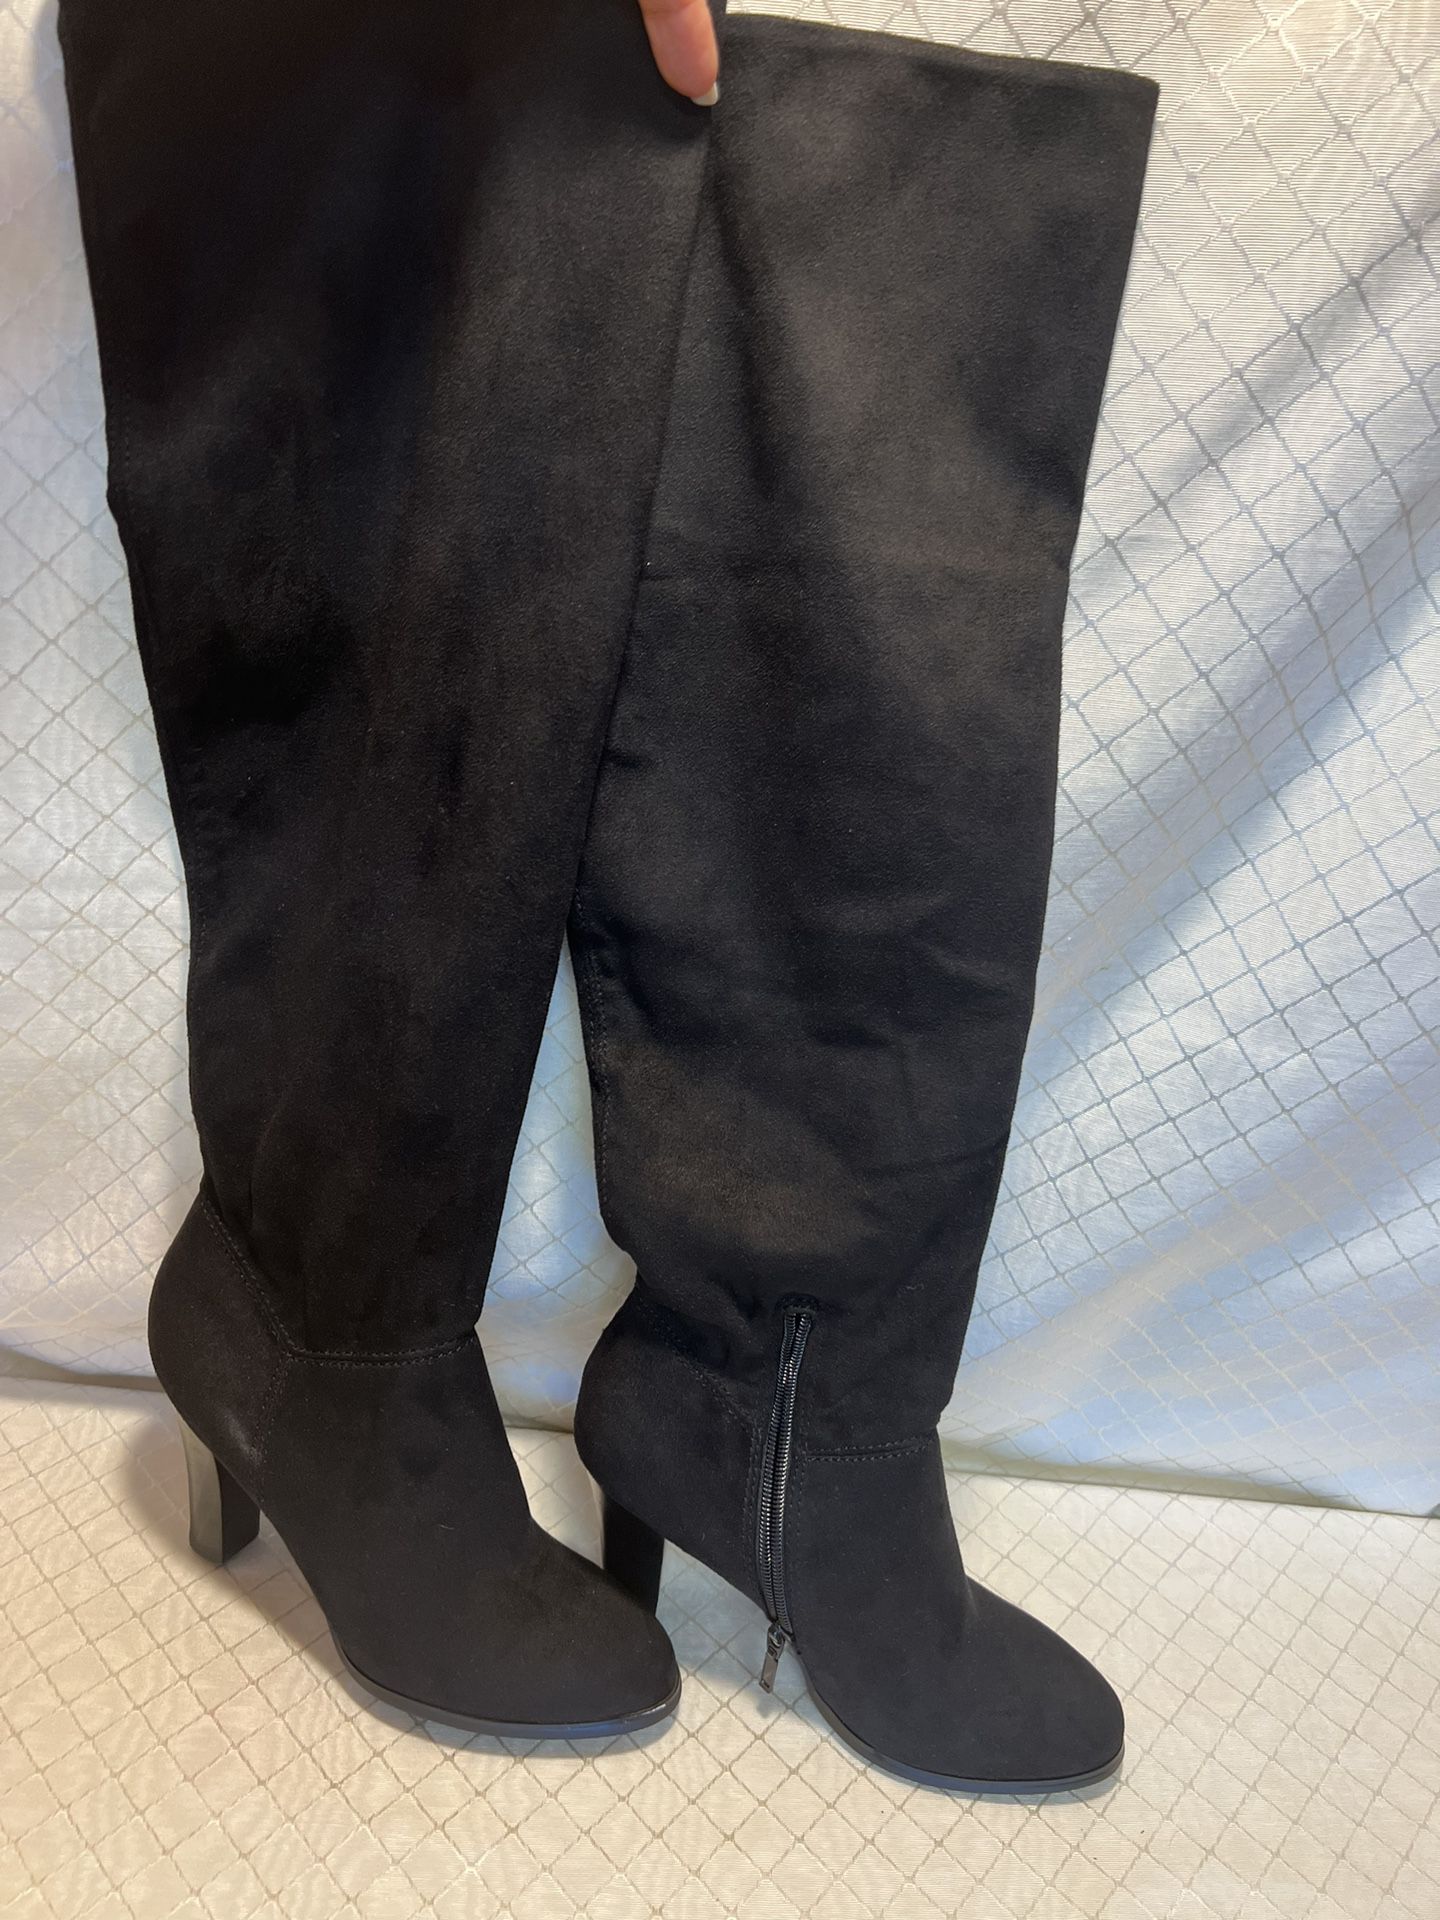 Odom Black Over the Knee Boots womens size 7.5 